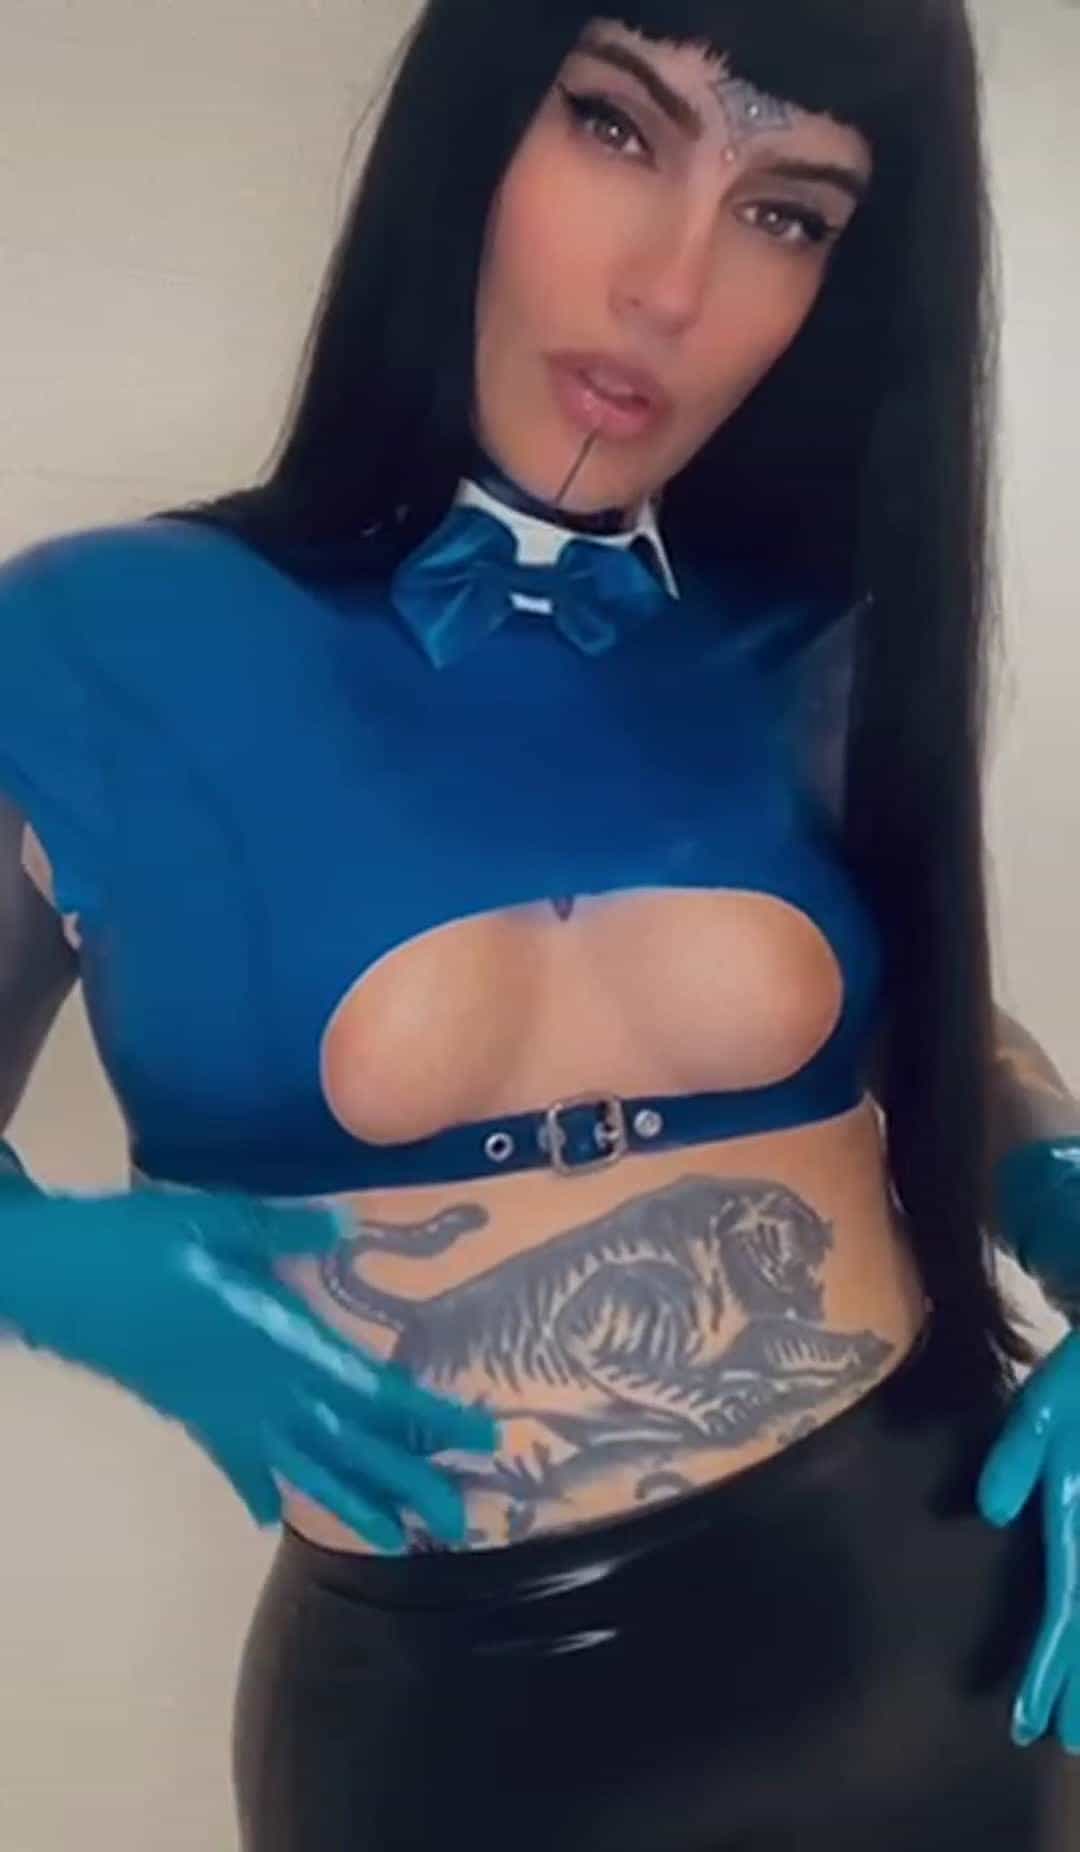 Latex outfit always looks better on a goth girl